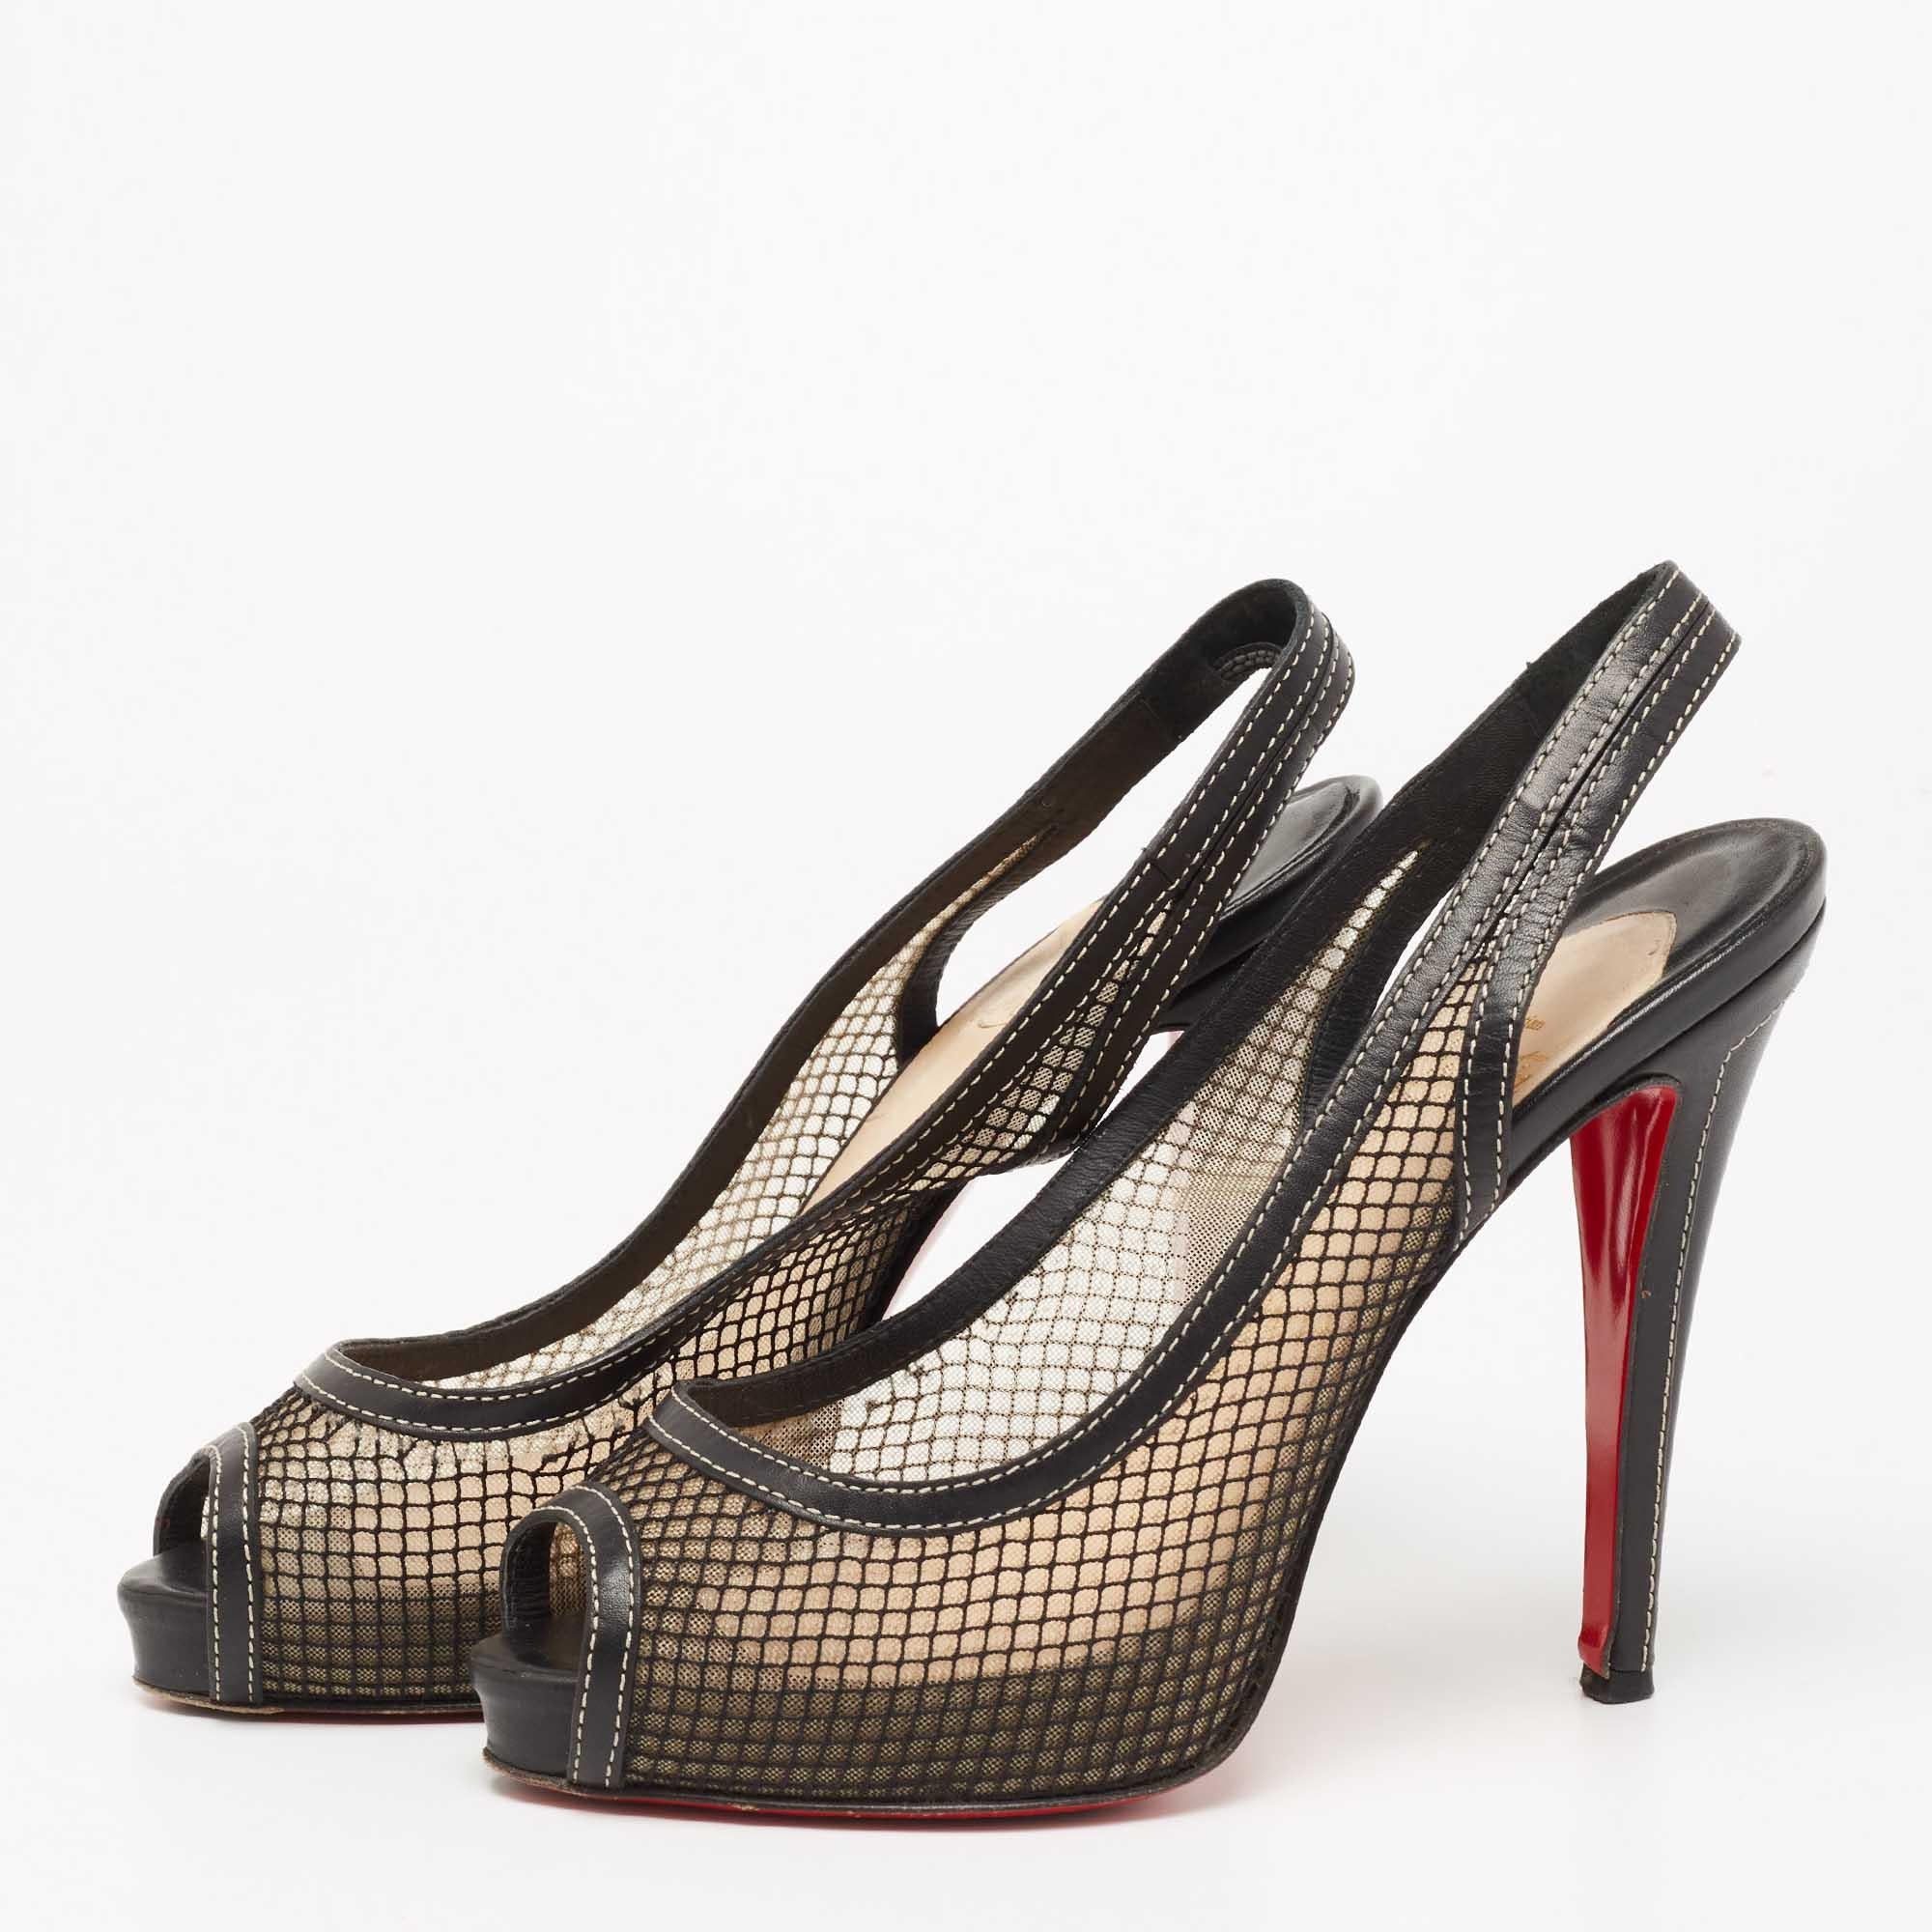 Escape the monotonous designs and move on to classy styles like these Canne A Peche pumps from Christian Louboutin. They are made from black fishnet and leather and are enhanced with peep toes, a slingback, and 12.5 cm heels. Feel bold and confident